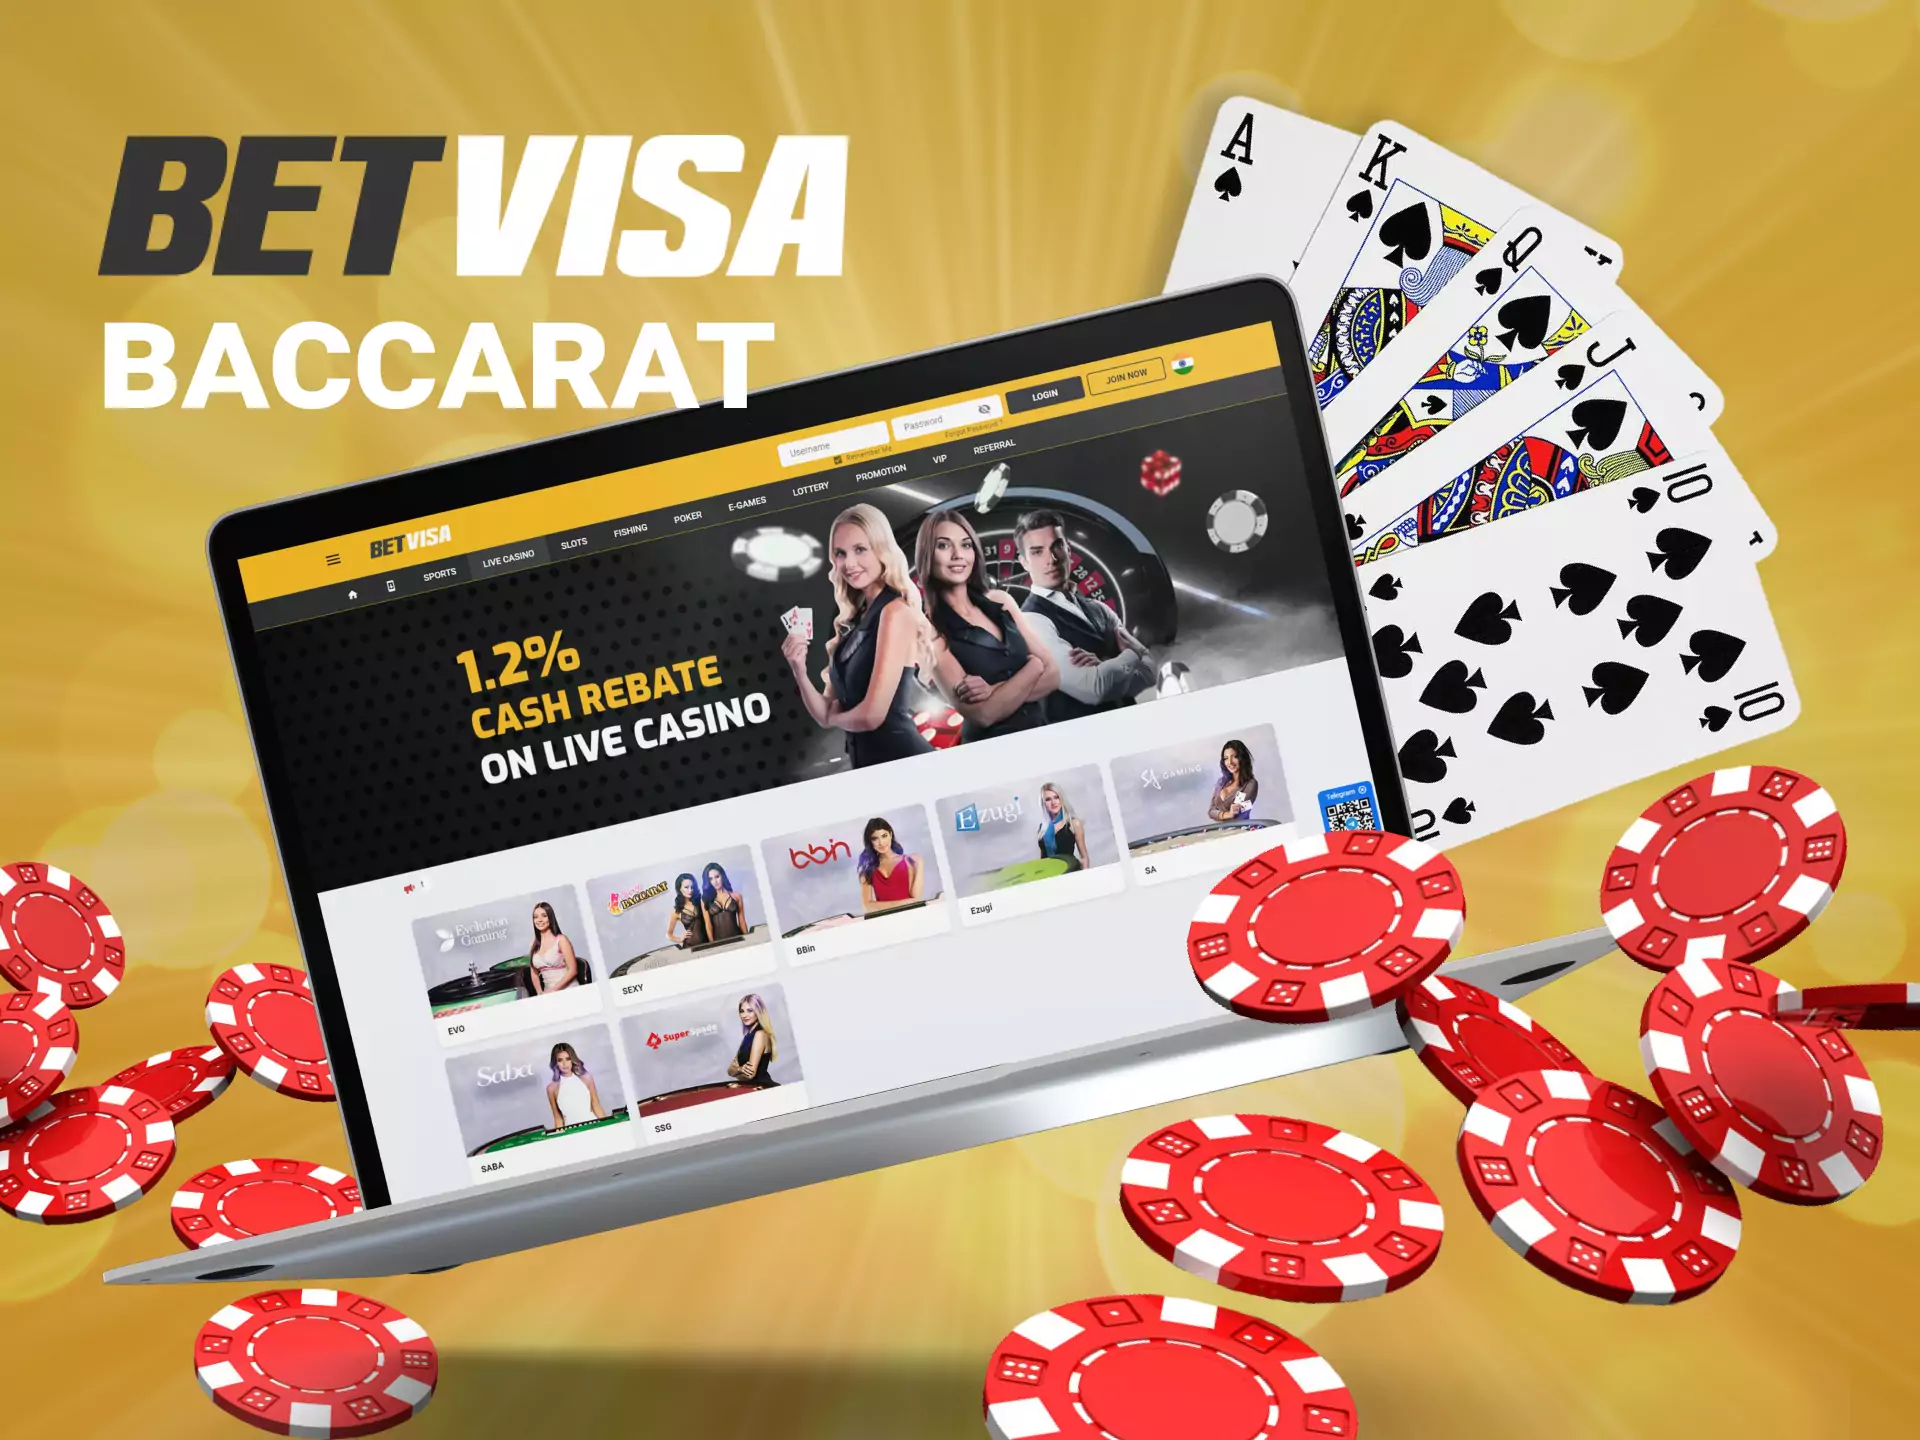 In the Betvisa Casino, you can play baccarat.